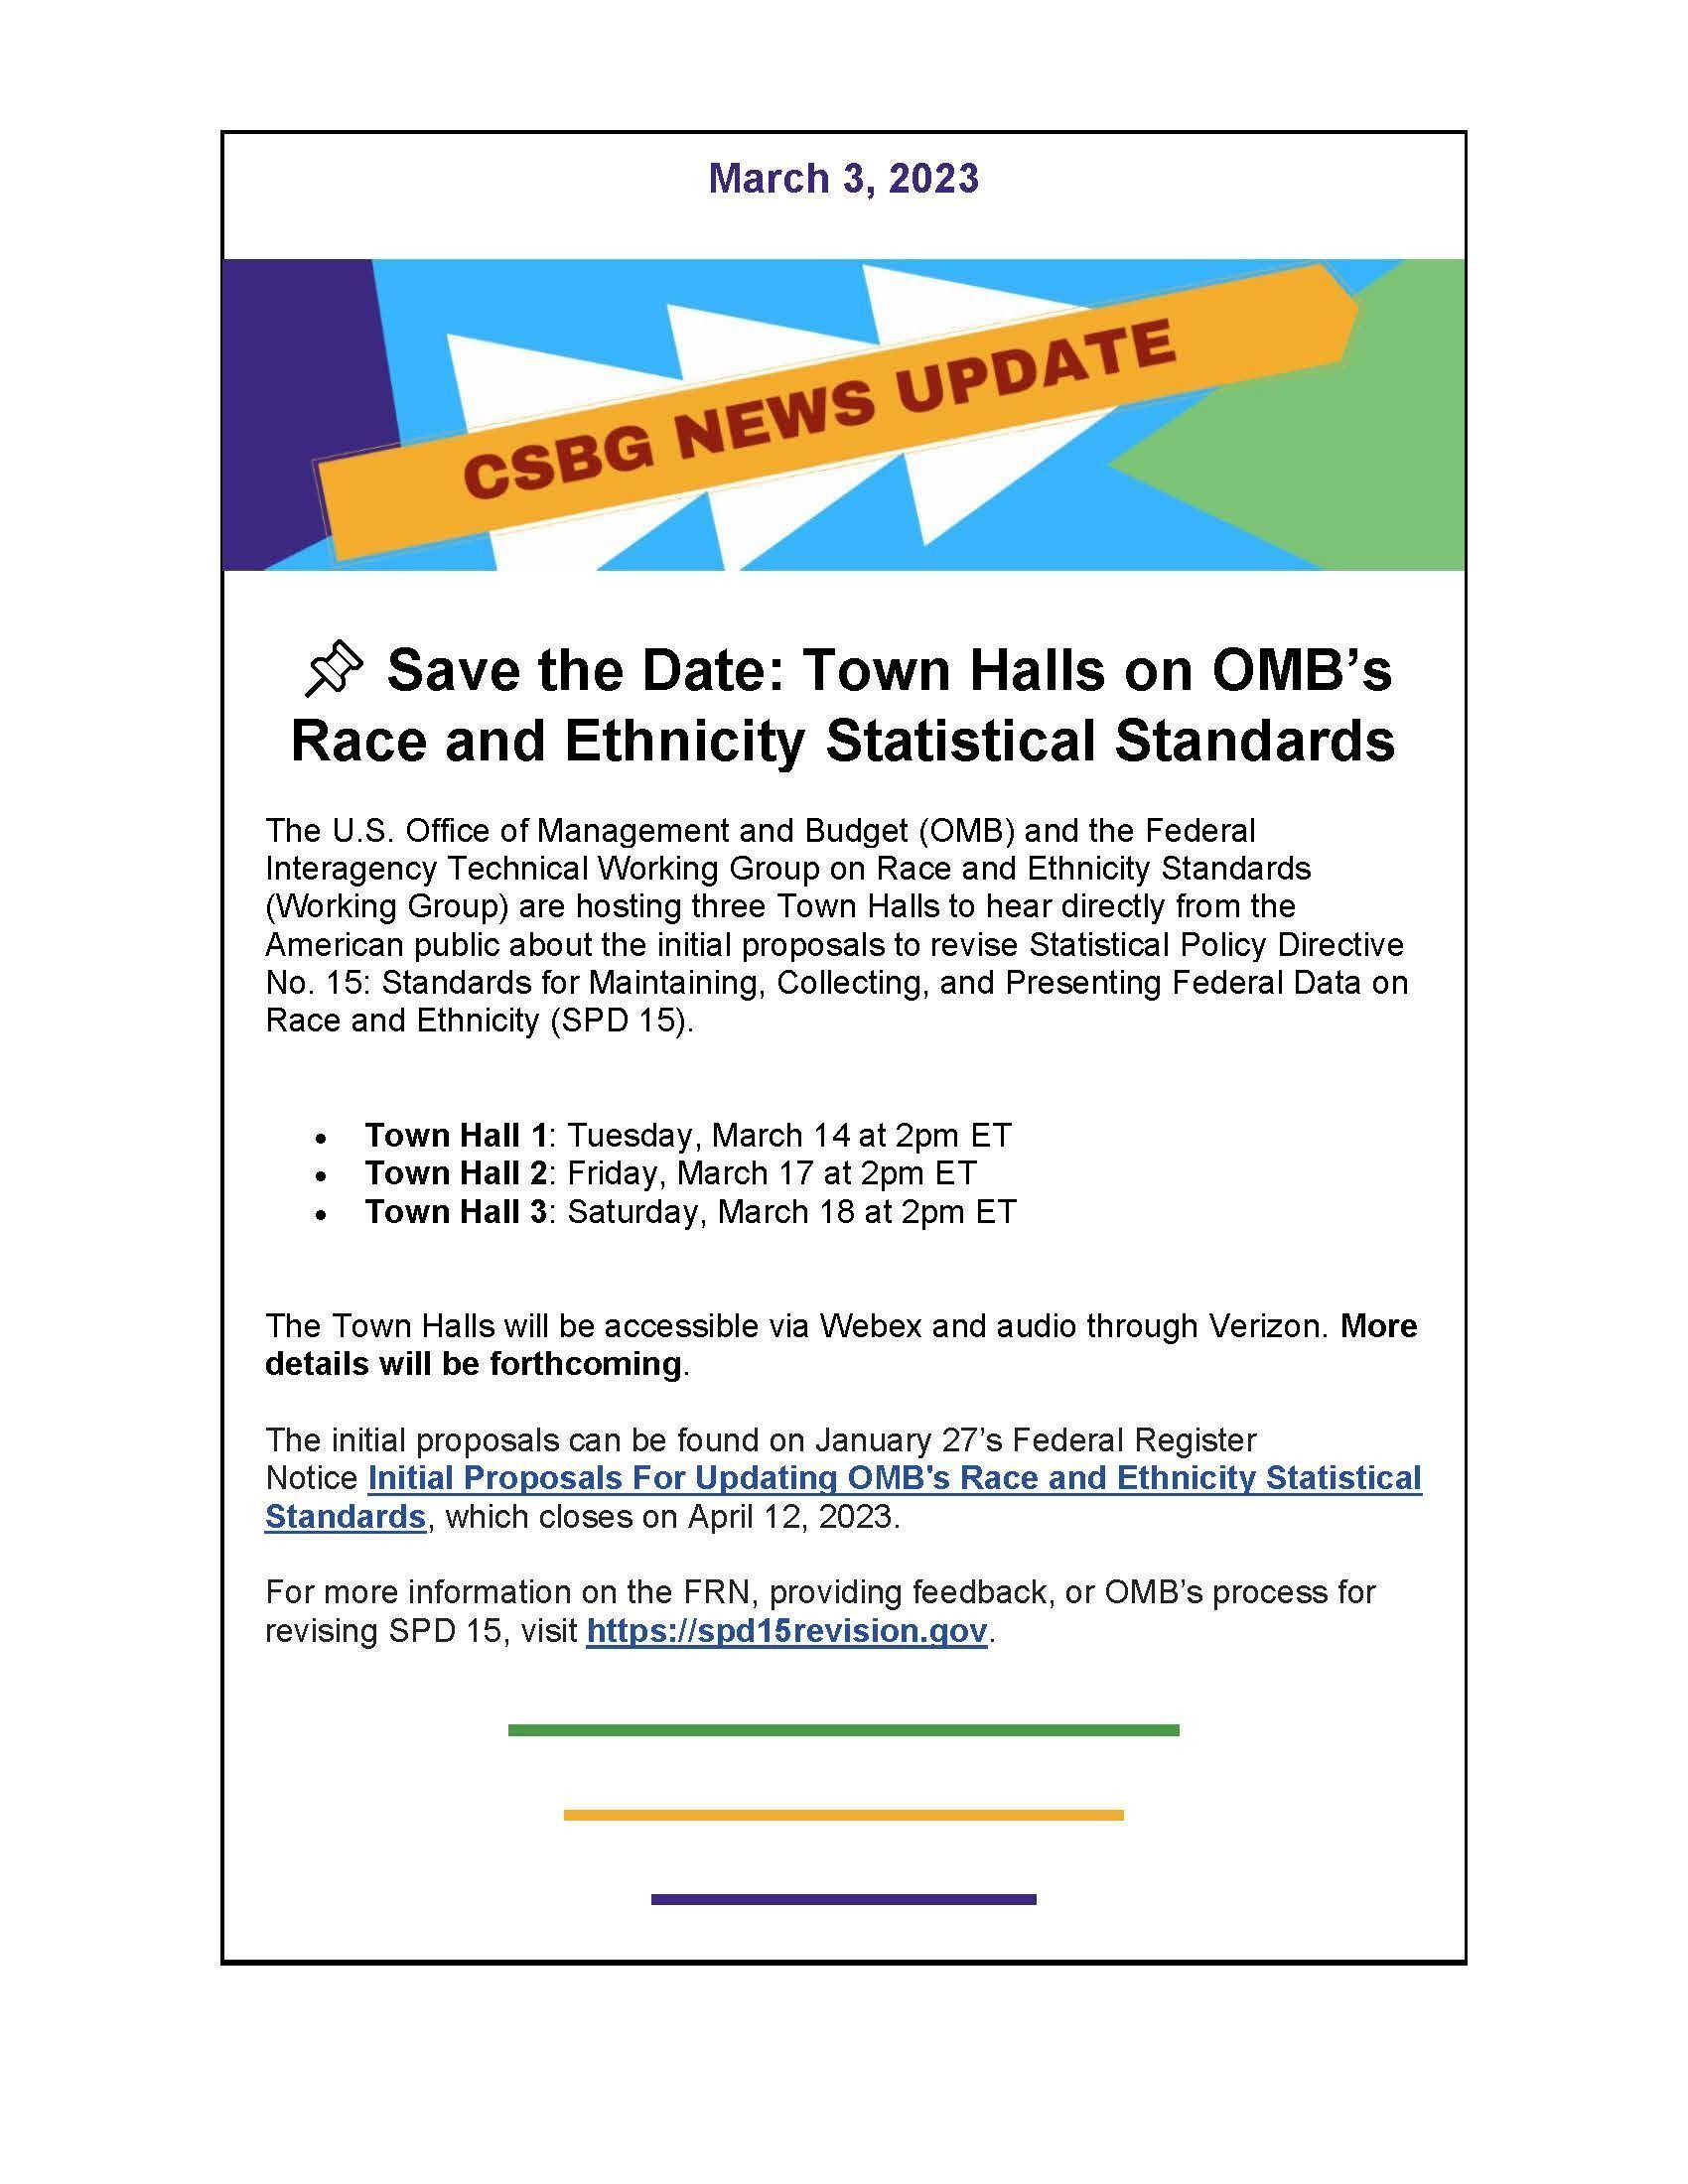 Save the Date: Town Halls on OMB’s Race and Ethnicity Statistical Standards